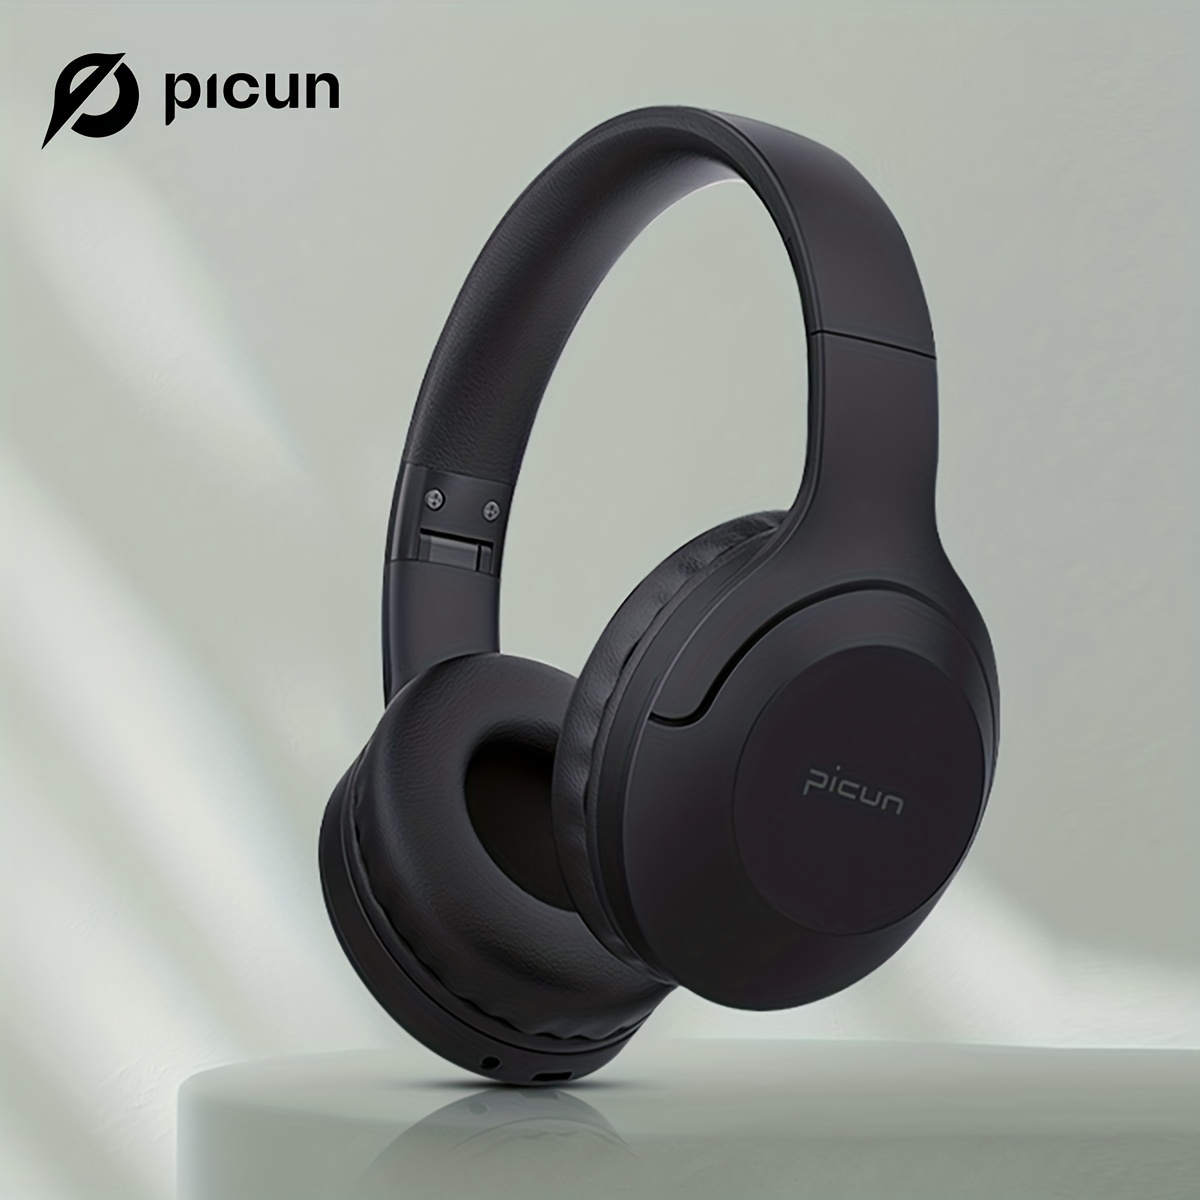 

B-01s Wireless Headphones, Hd Stereo Sound Over Ear Headphones With Built-in Microphones, Deep Bass 40 Hours Playtime, Headset Hifi Stereo Foldable Lightweight Headset, Tf/for Cell Phone/pc/home.